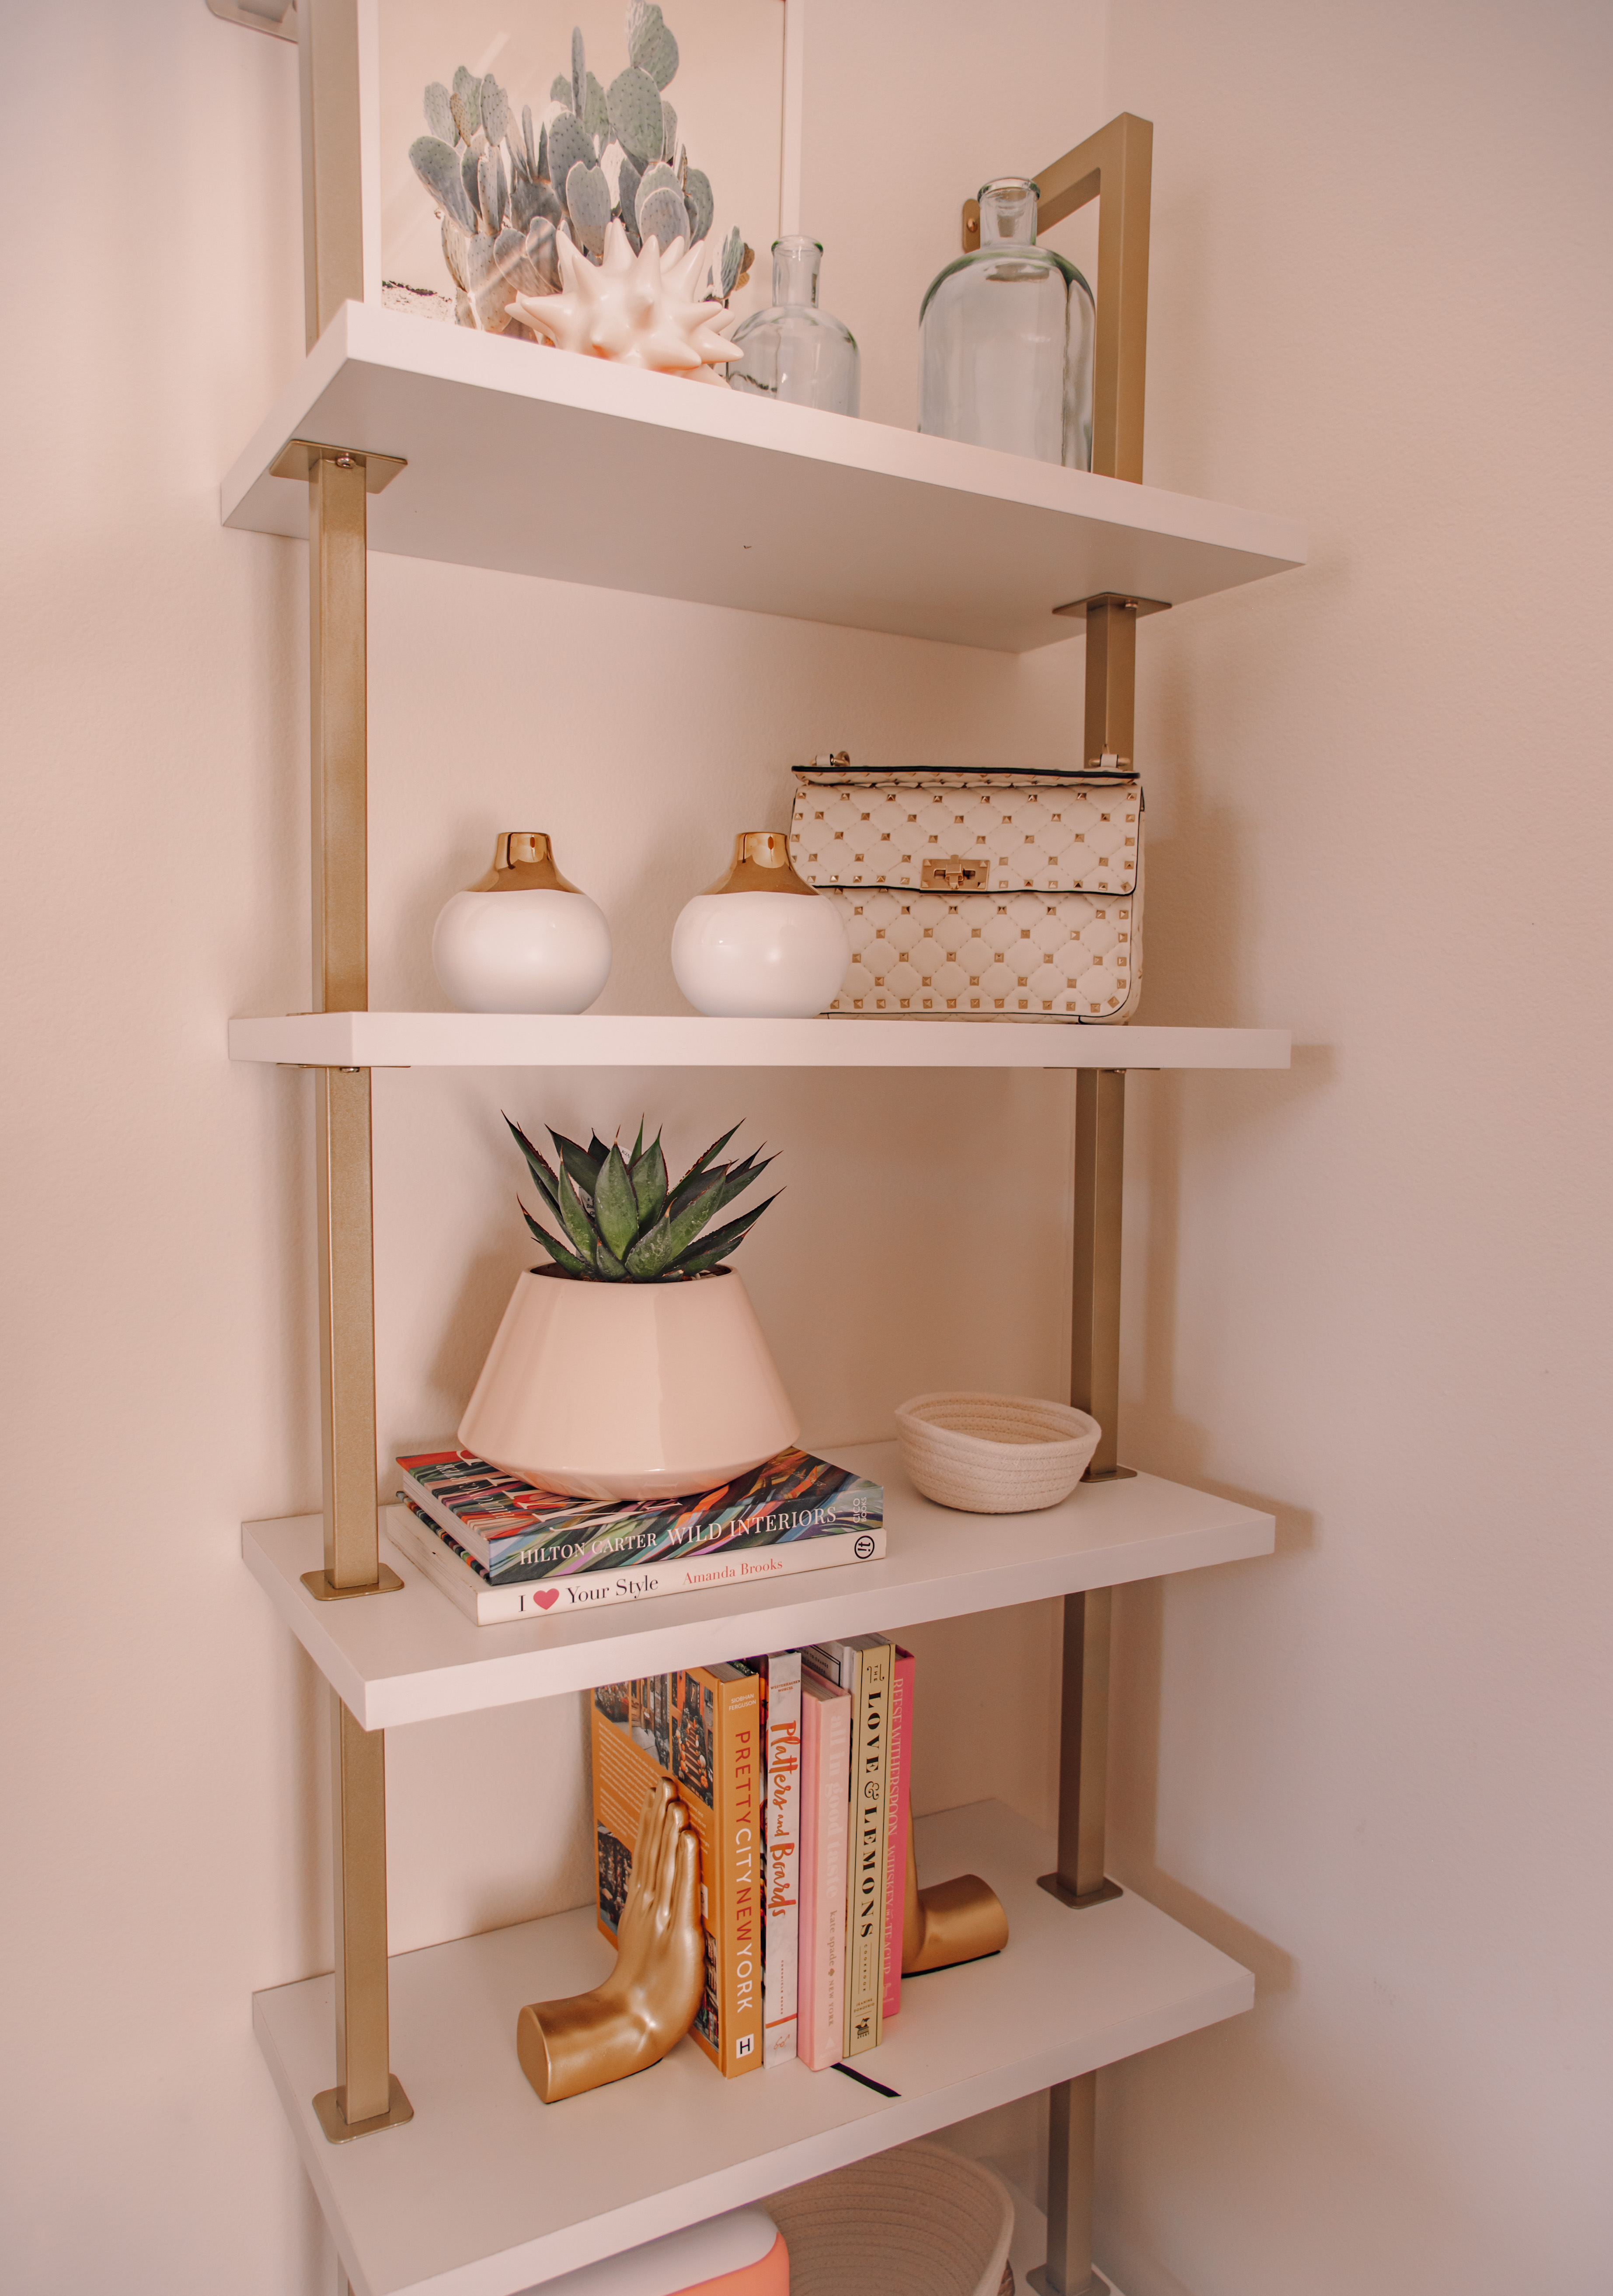 how to style bookshelves